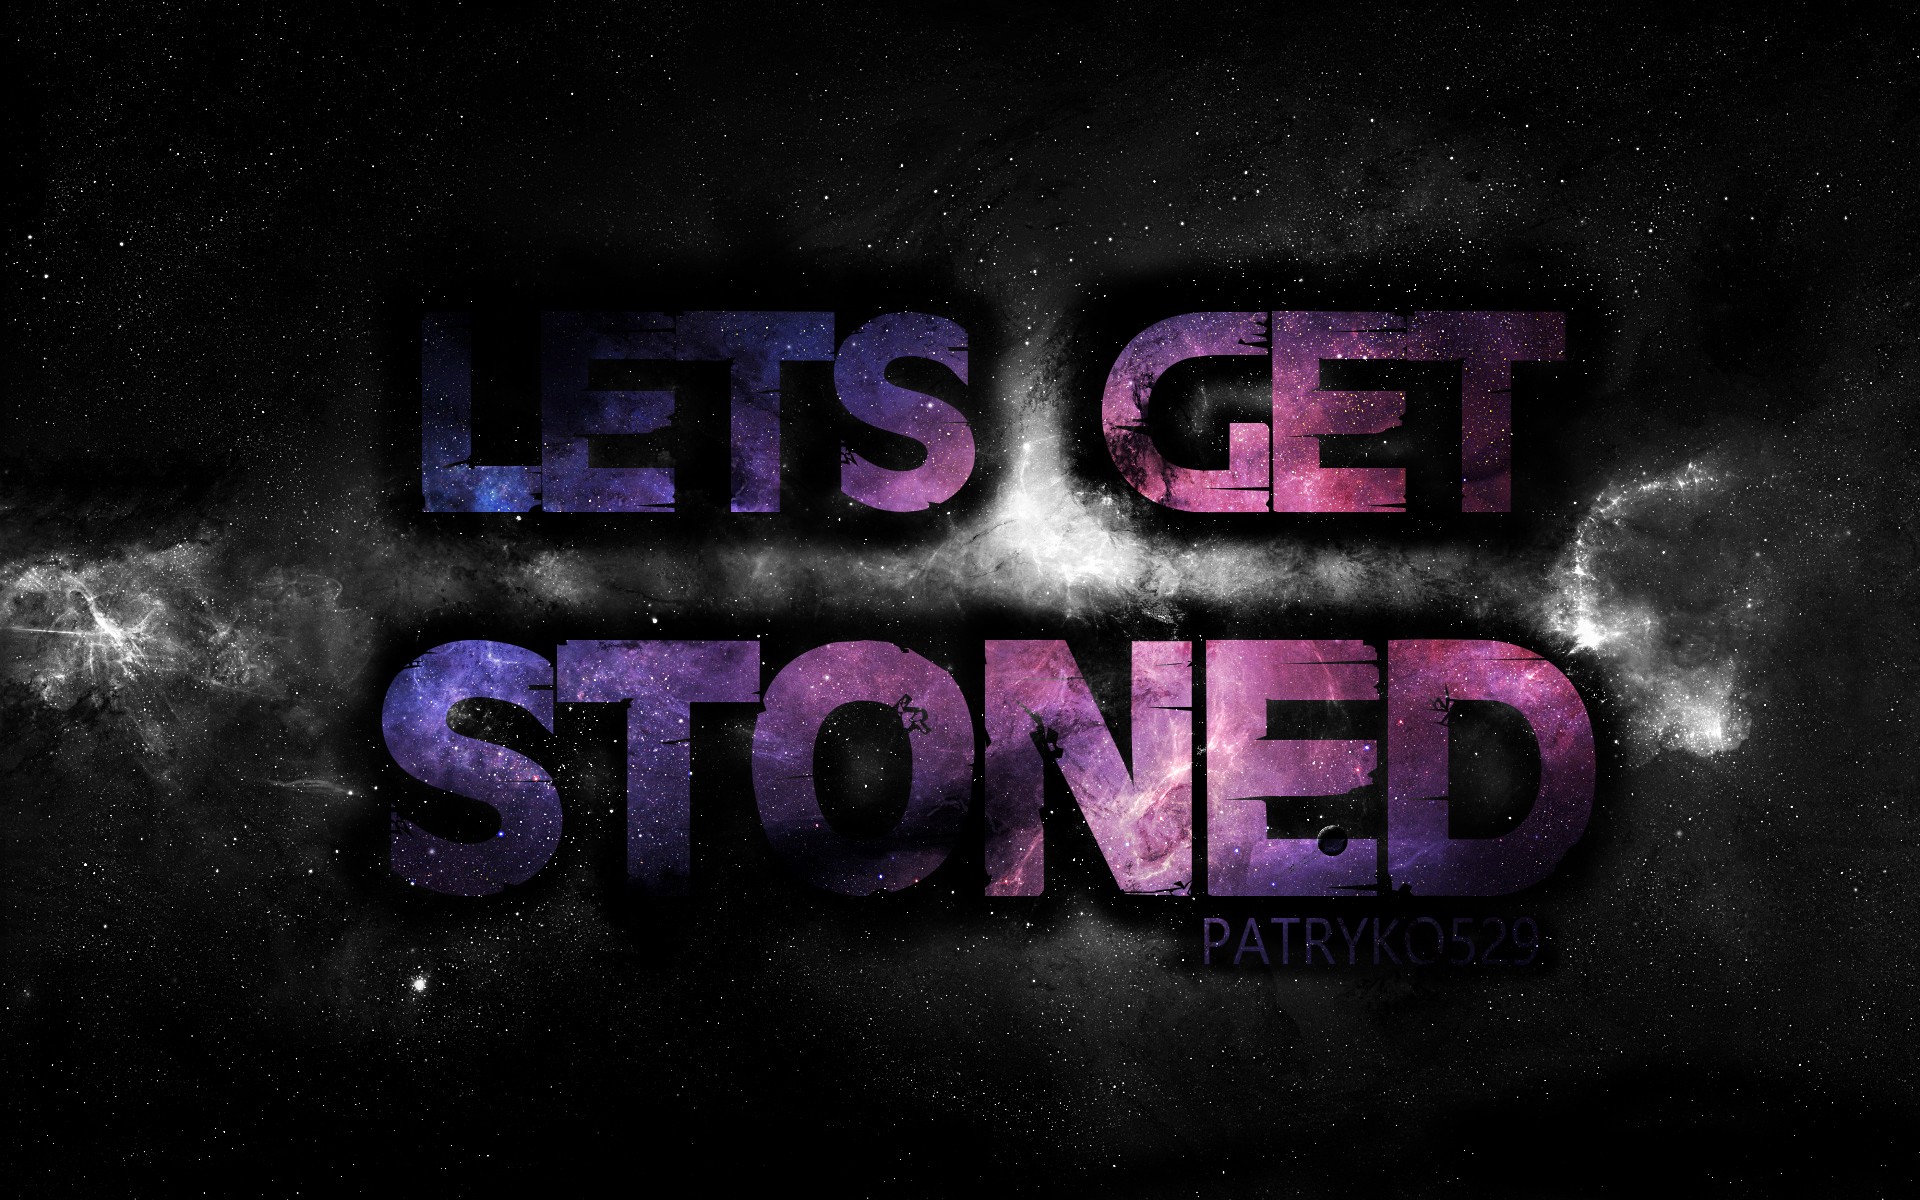 drugs, Galaxies, Marijuana, Typography, Lsd, Selective, Coloring, Stoned, Cosmo, Patryko529, Baked Wallpaper